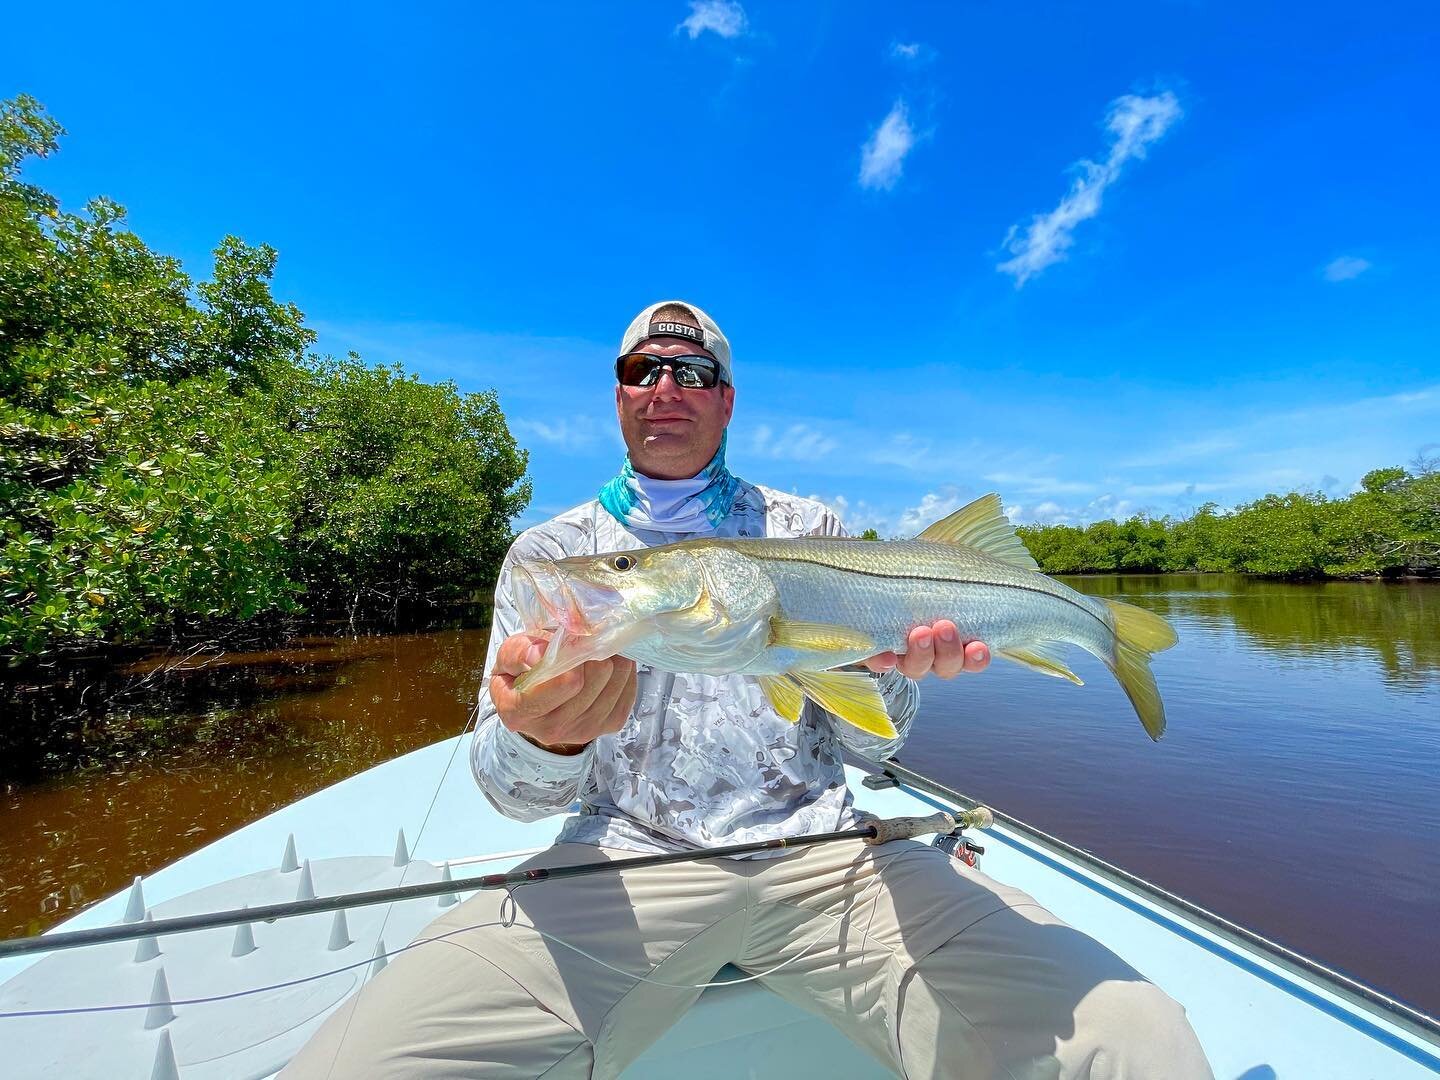 A great first #snookonfly for Mike earlier this week! #flyfishing#marcoisland#naples#goodland#southwestflorida#fishingcharters